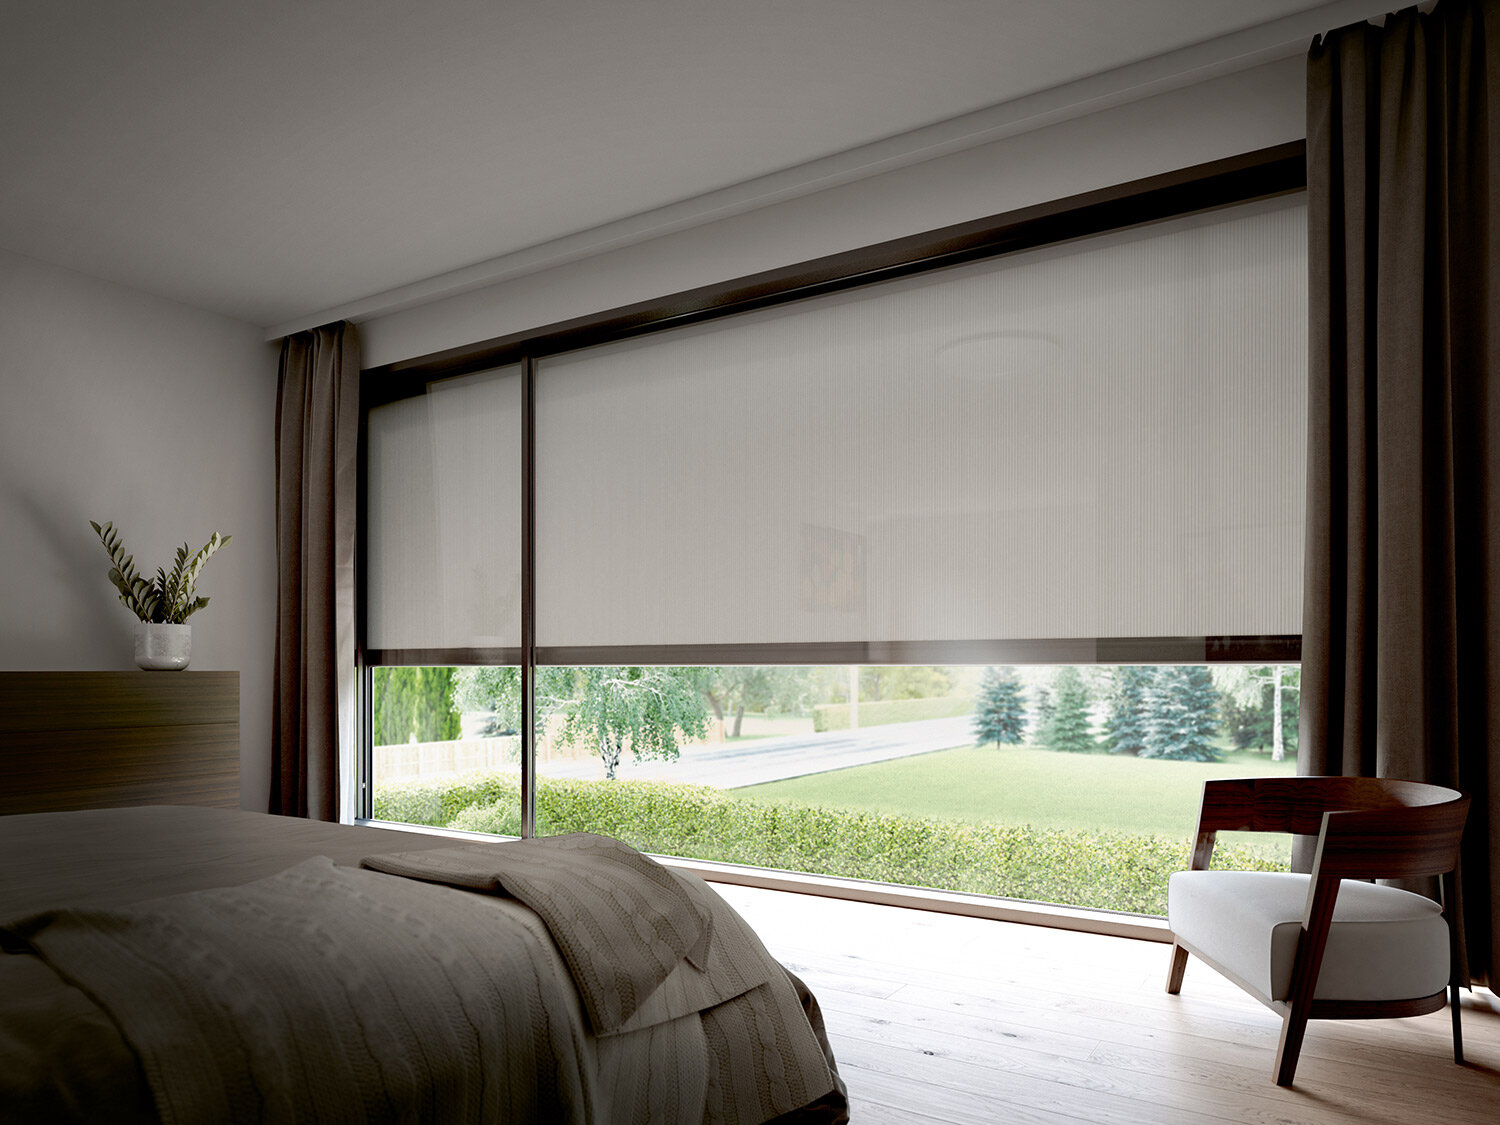 Motorised External Blinds London and UK. External blinds are ideal in situations of solar gain as the blind stops the sunlight before it reaches the glass. Ideal for windows, doors, roof lights.